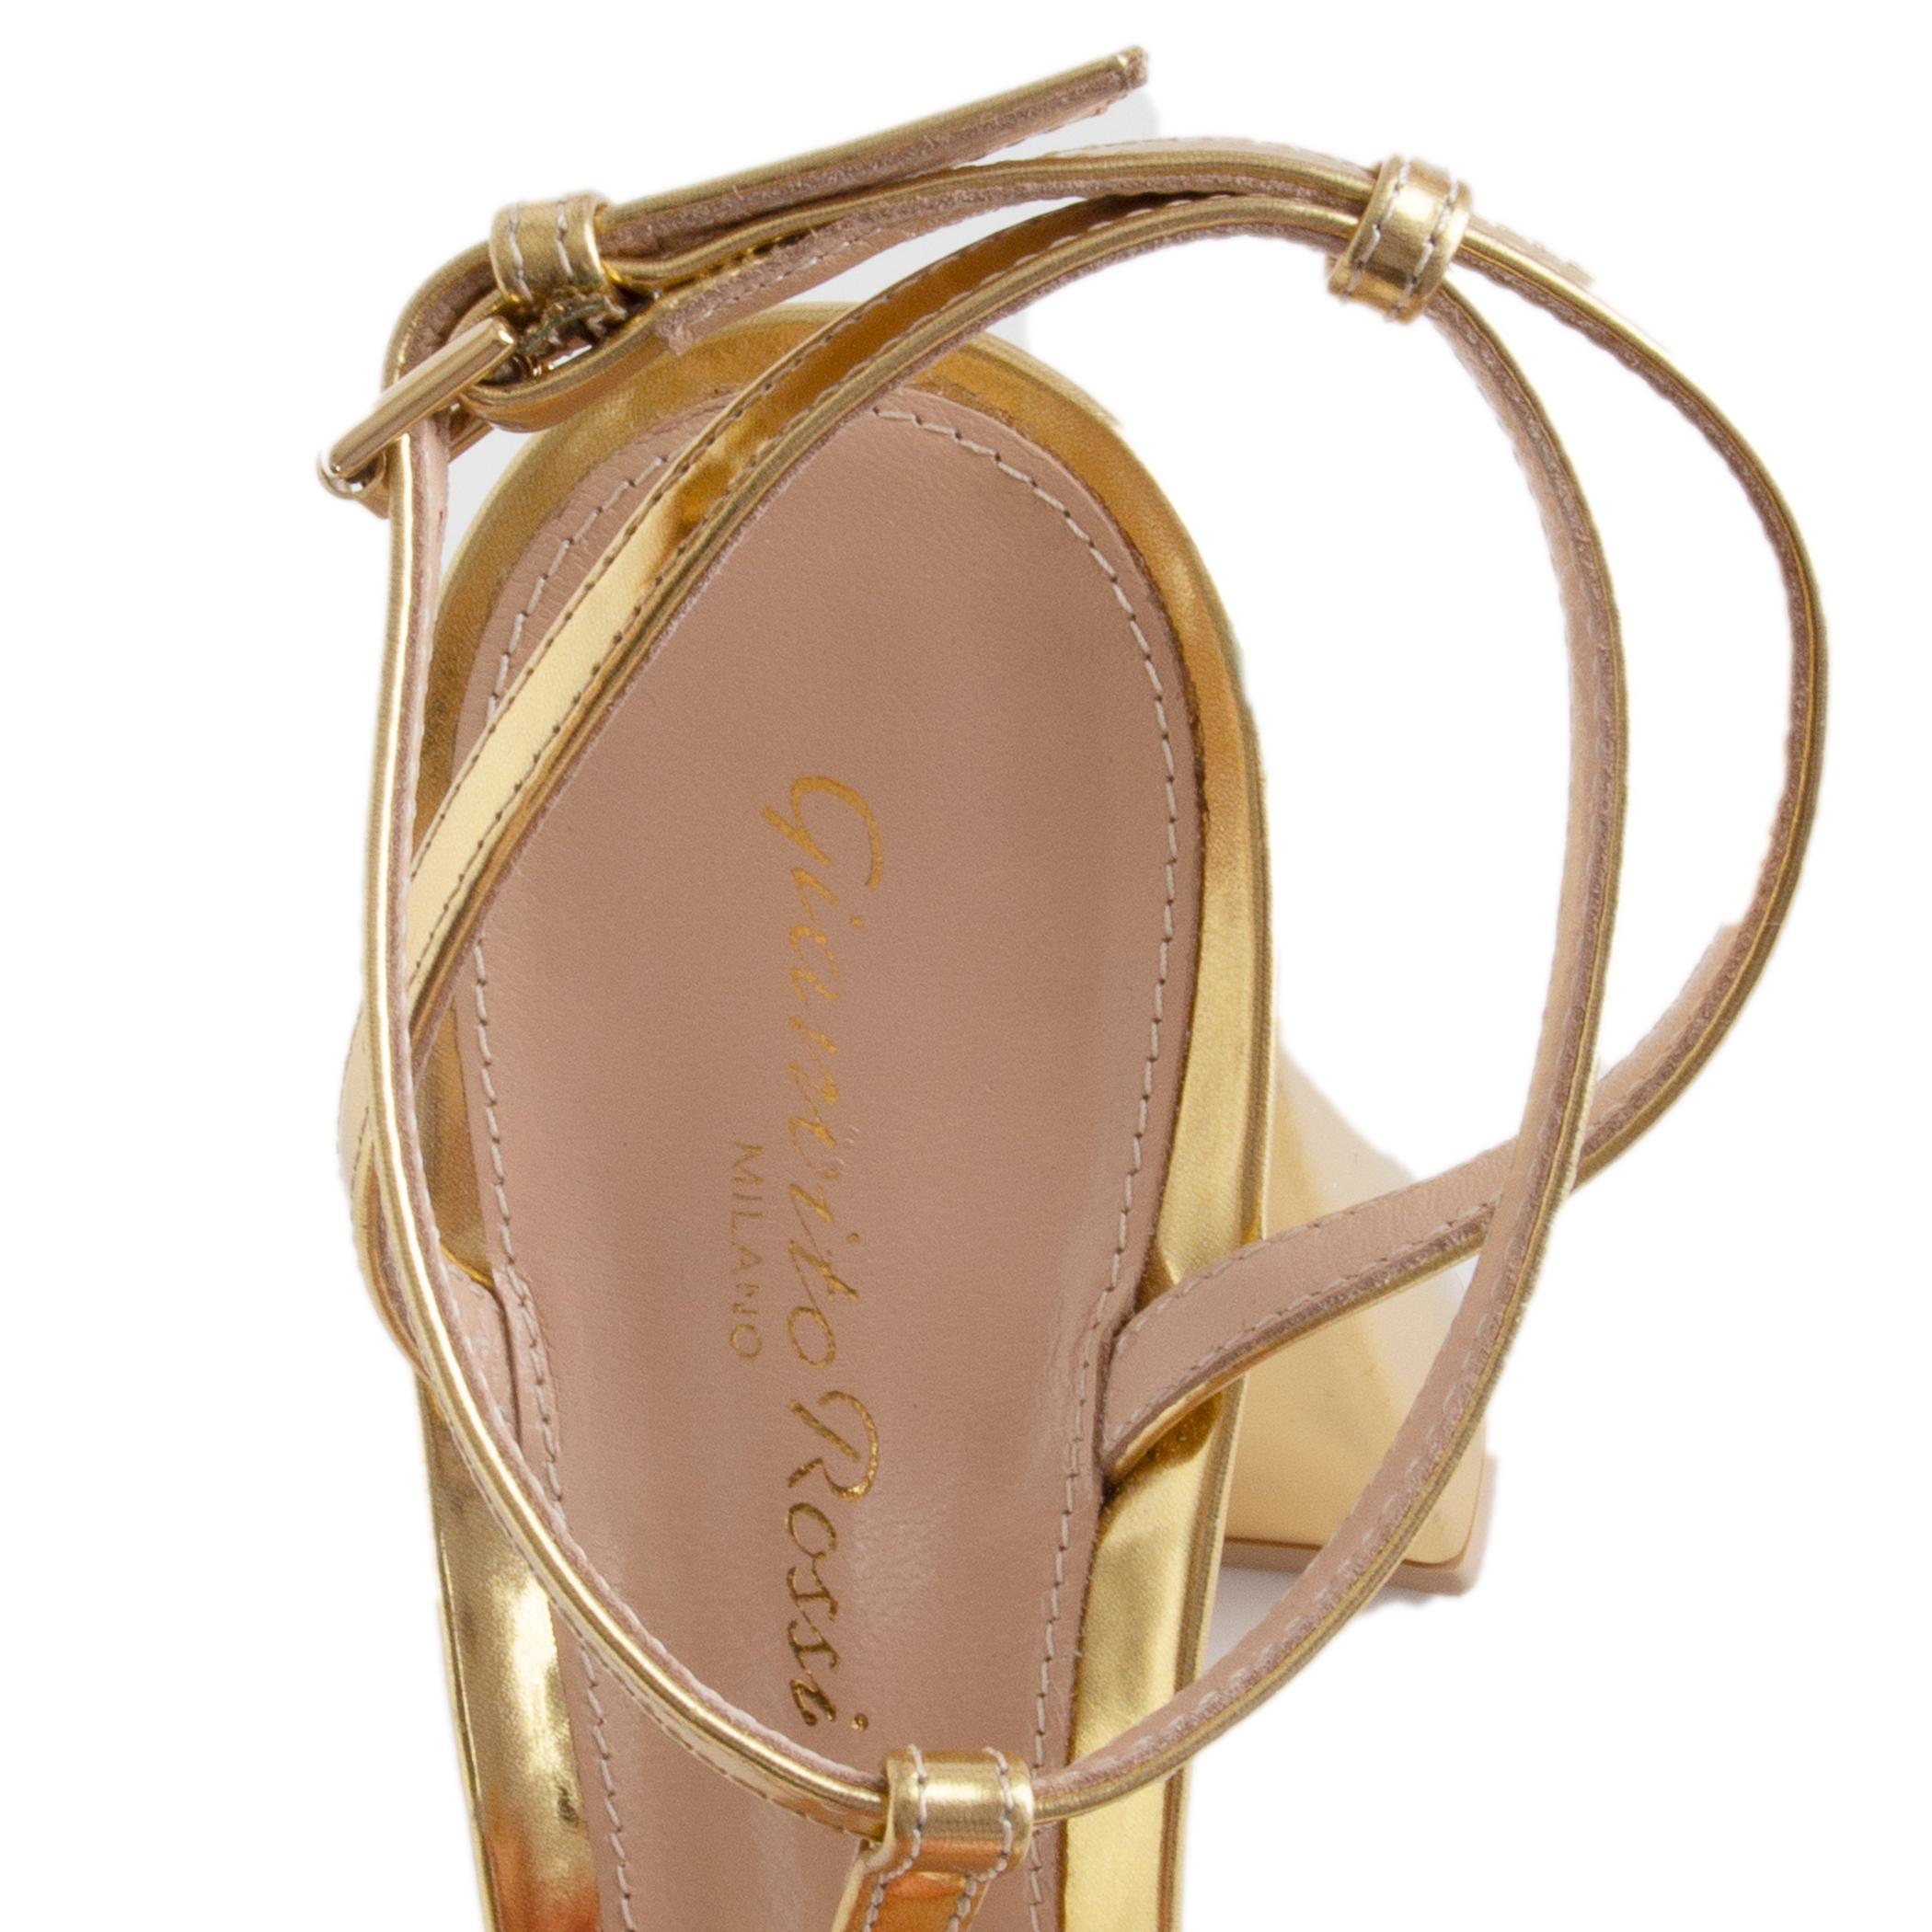 Gold GIANVITO ROSSI metallic gold leather T-STRAP BLOCK HEEL Sandals Shoes 41